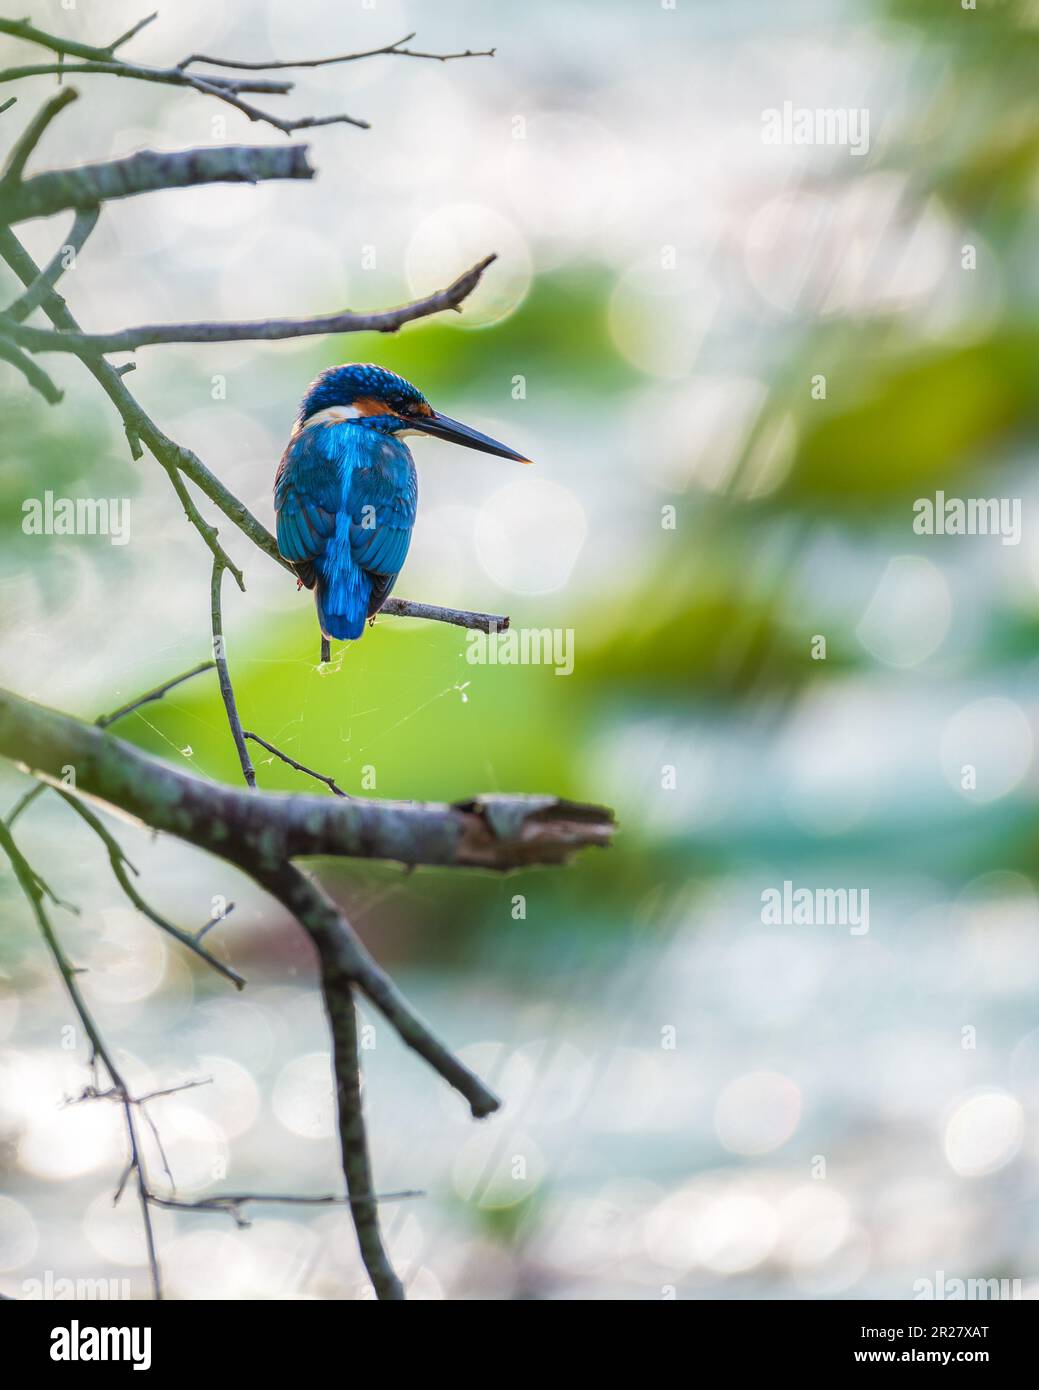 The ethereal beauty of a kingfisher bird, and soft morning light shine the water in the background, creating dreamy bird portraiture. Stock Photo